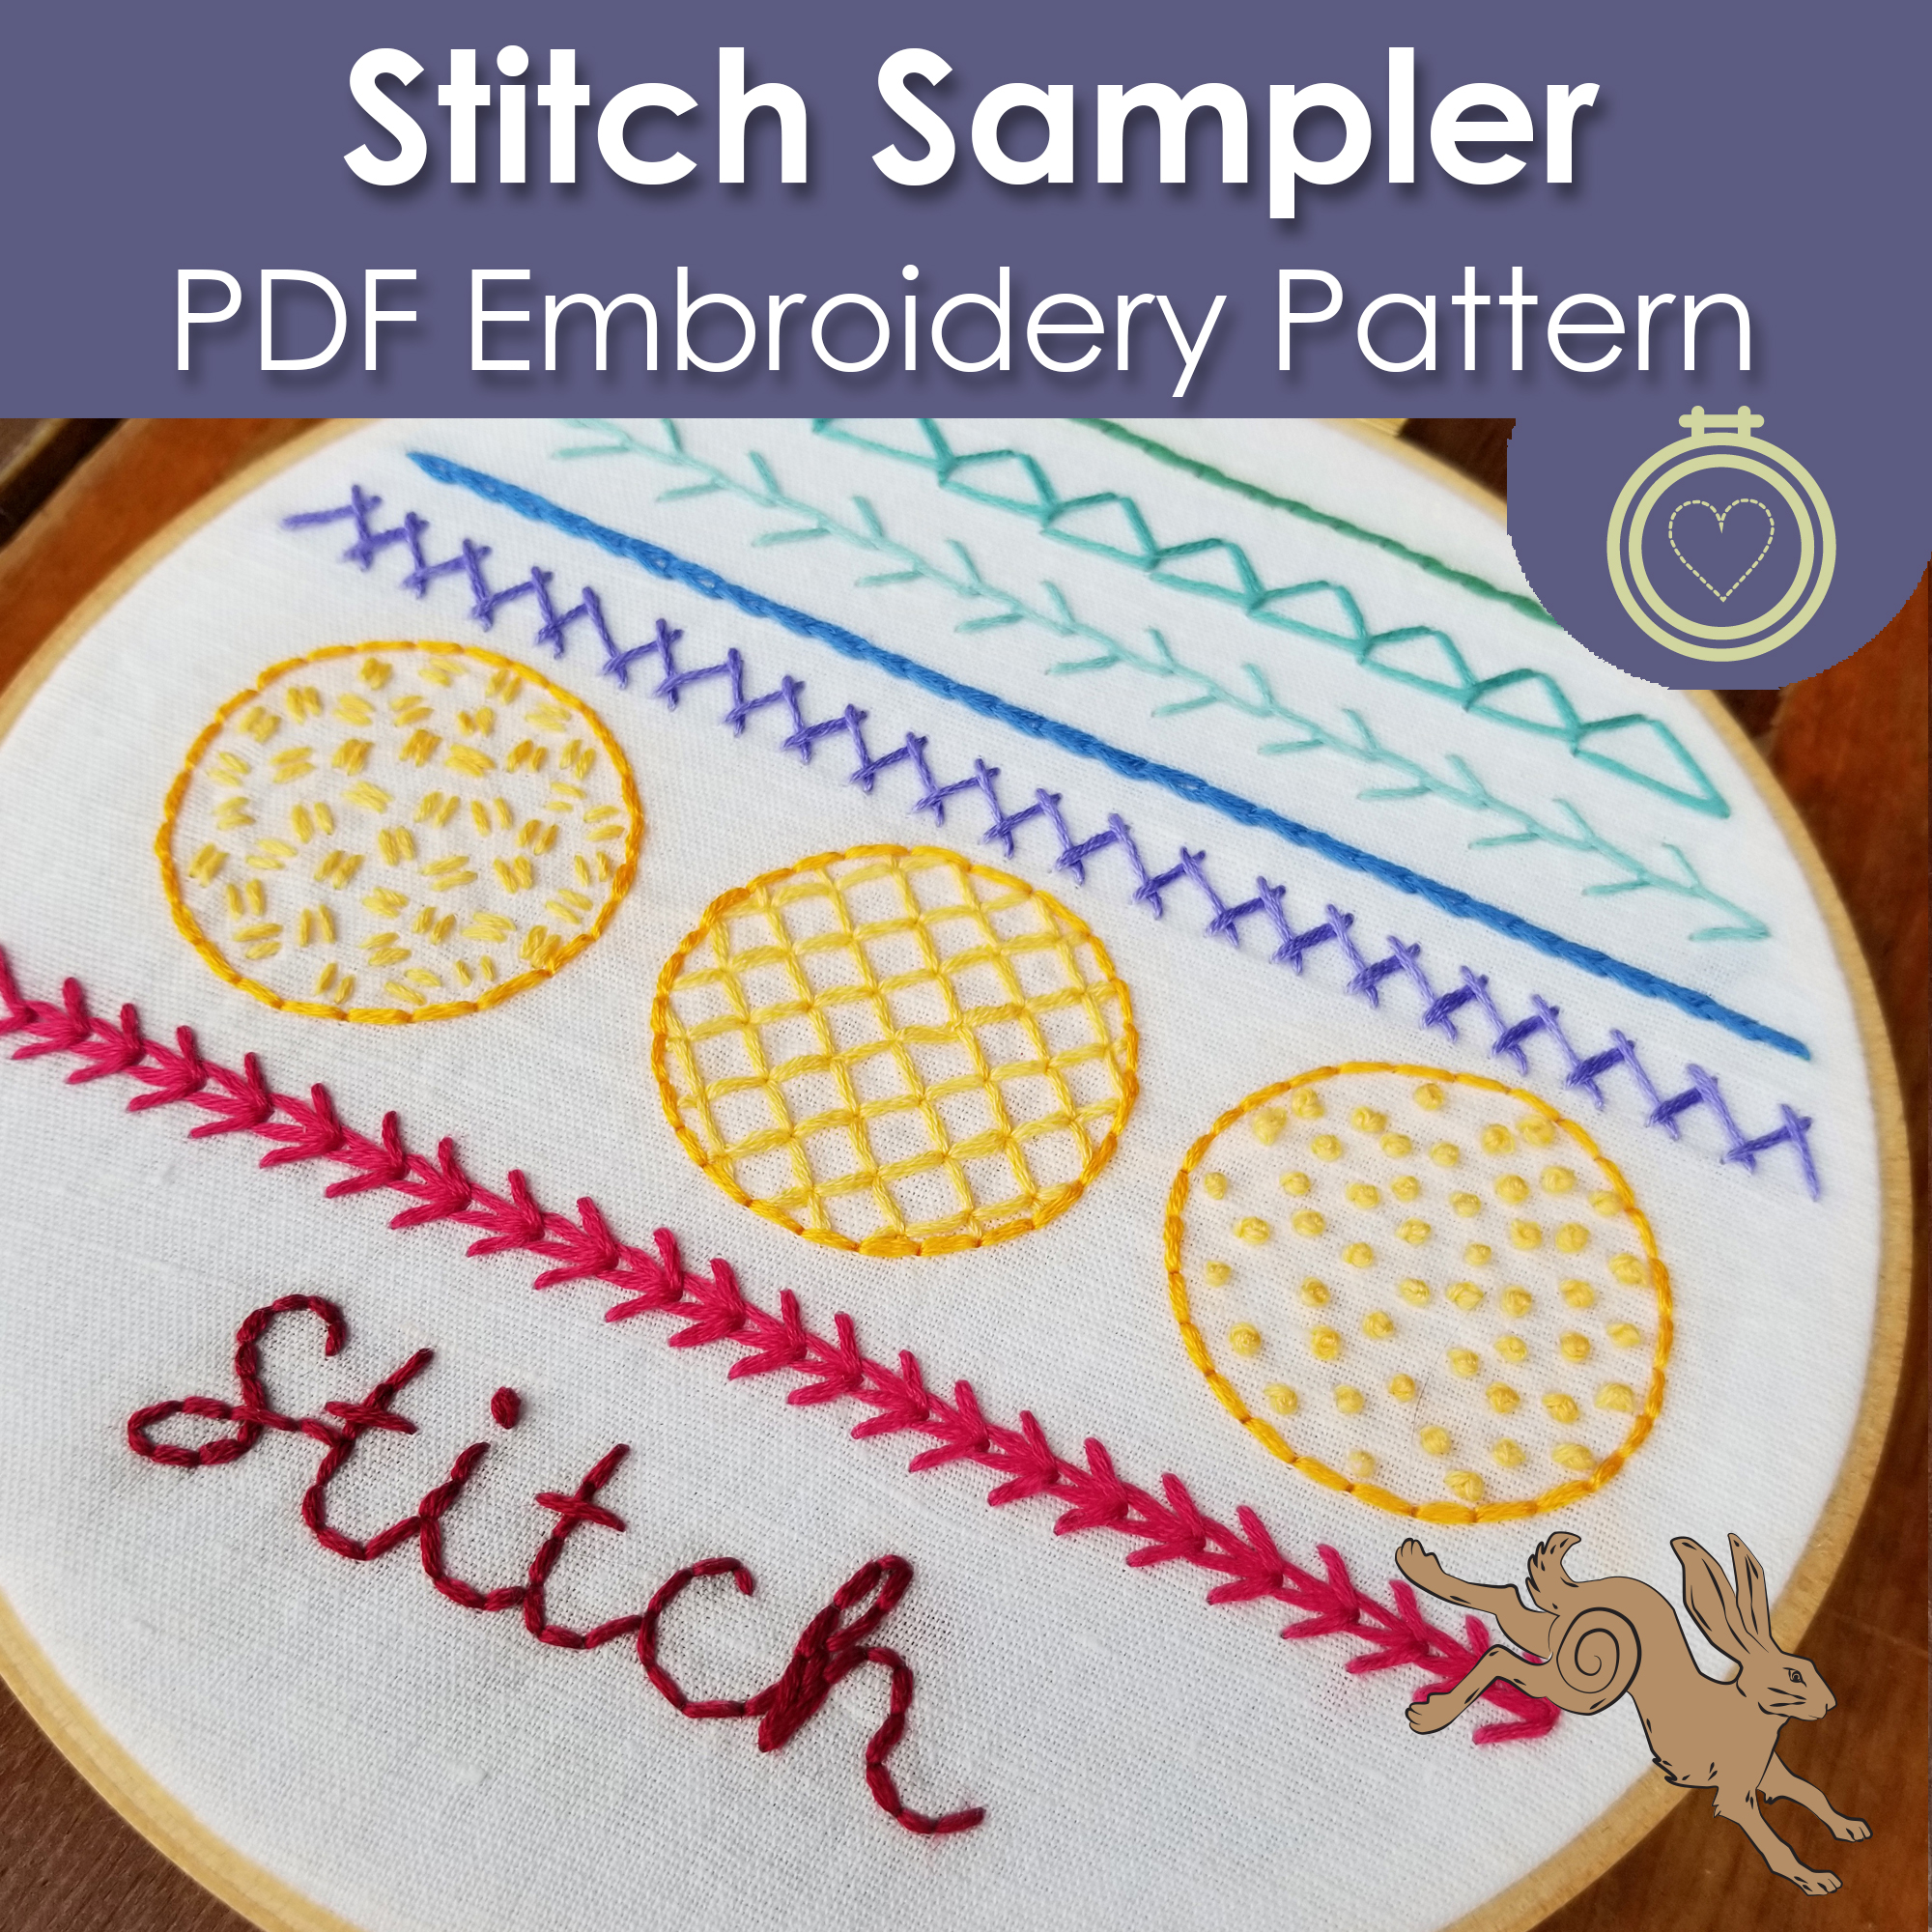 The Best Pens for Transferring Embroidery Designs – Muse of the Morning –  Hand Dyed Embroidery Floss & Fabric + PDF Embroidery Patterns